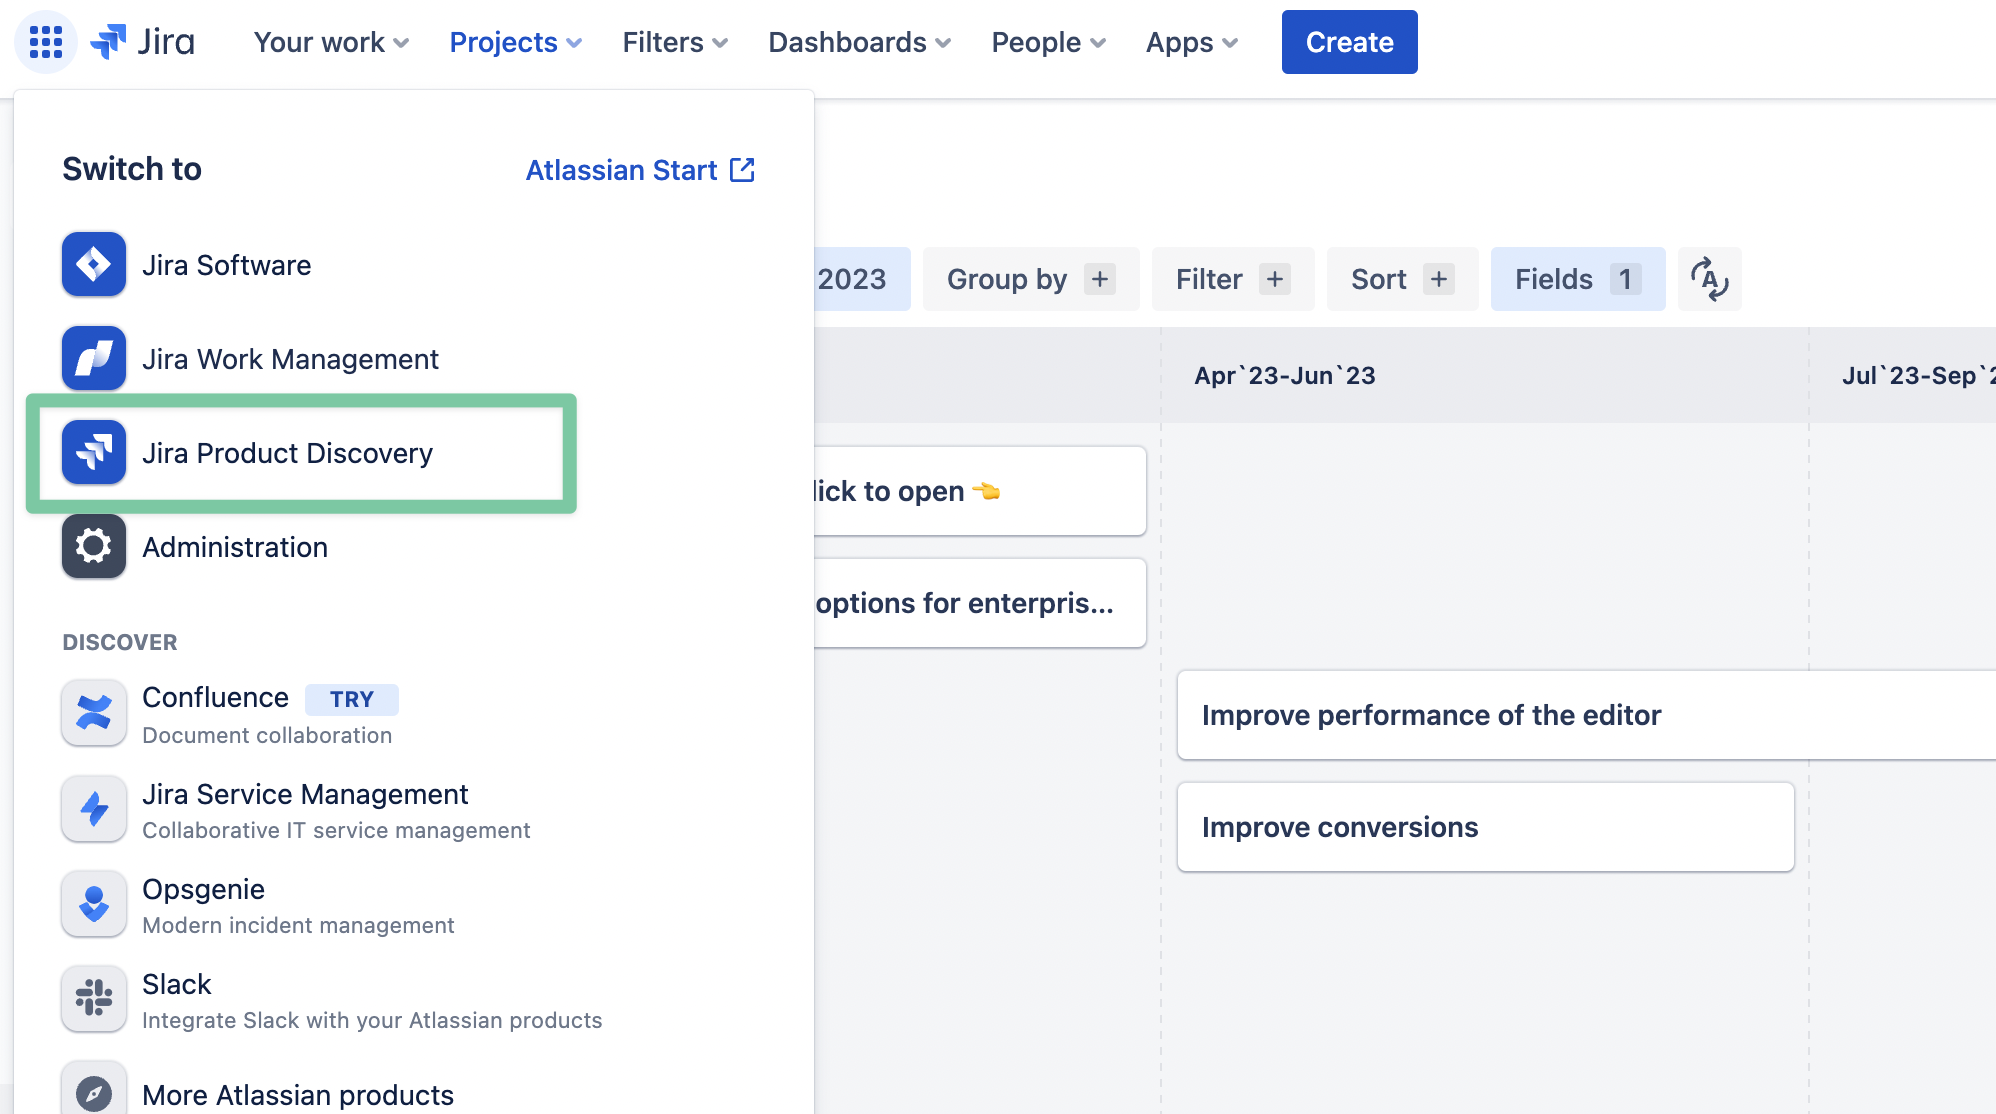 Jira Product Discovery_Access